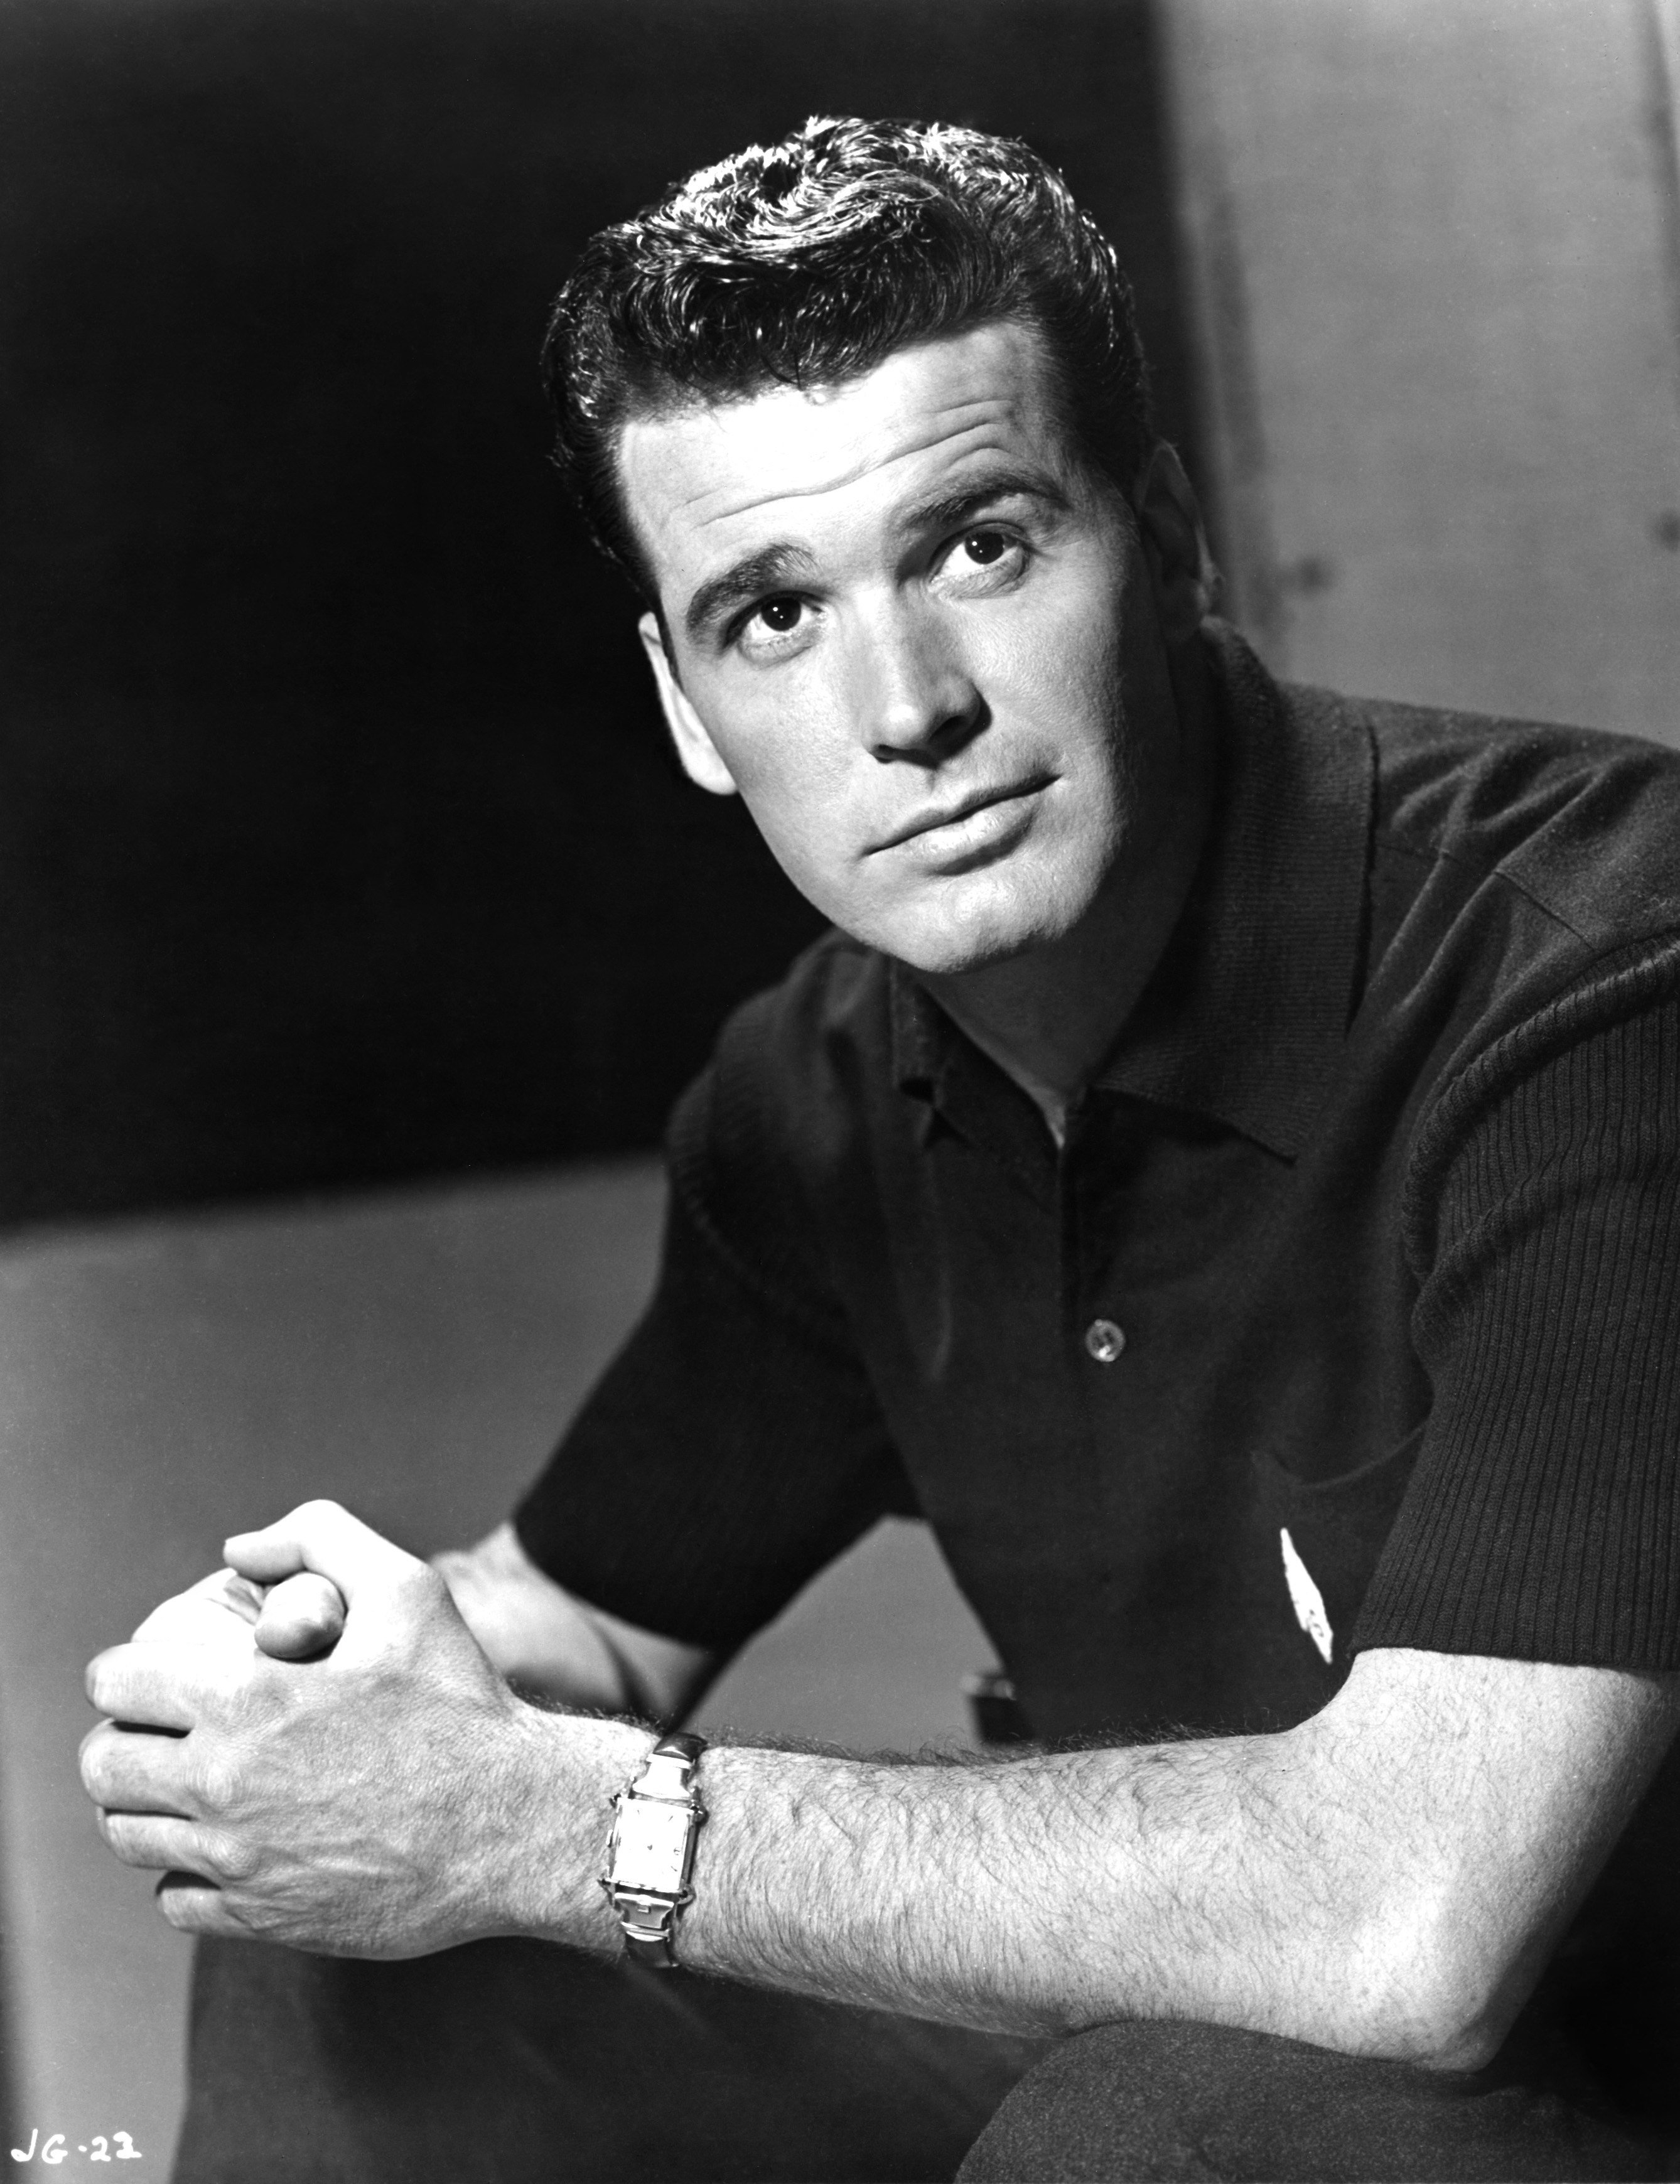 Actor James Garner posing for a black and white portrait in 1965 in Los Angeles, California | Source: Getty Images